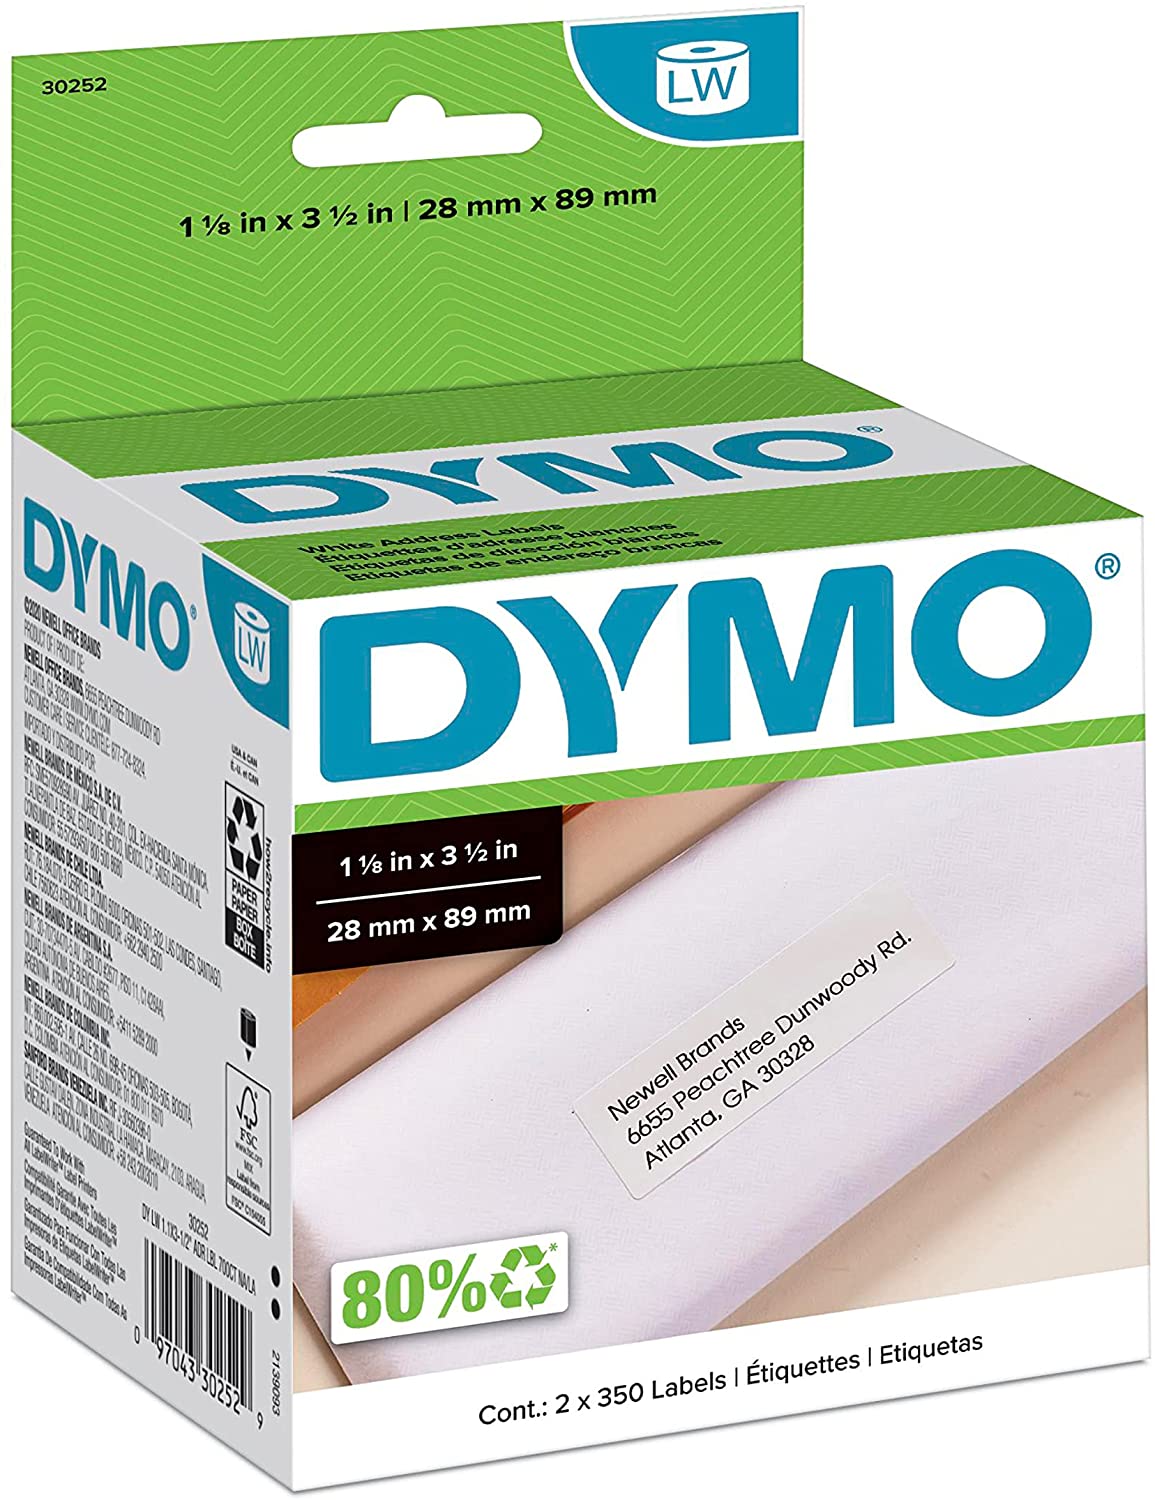 DYMO (30252) LW Mailing Address Labels for LabelWriter Label Printers, White, 1-1/8'' x 3-1/2'' - 2 Rolls of 350 Labels/Roll